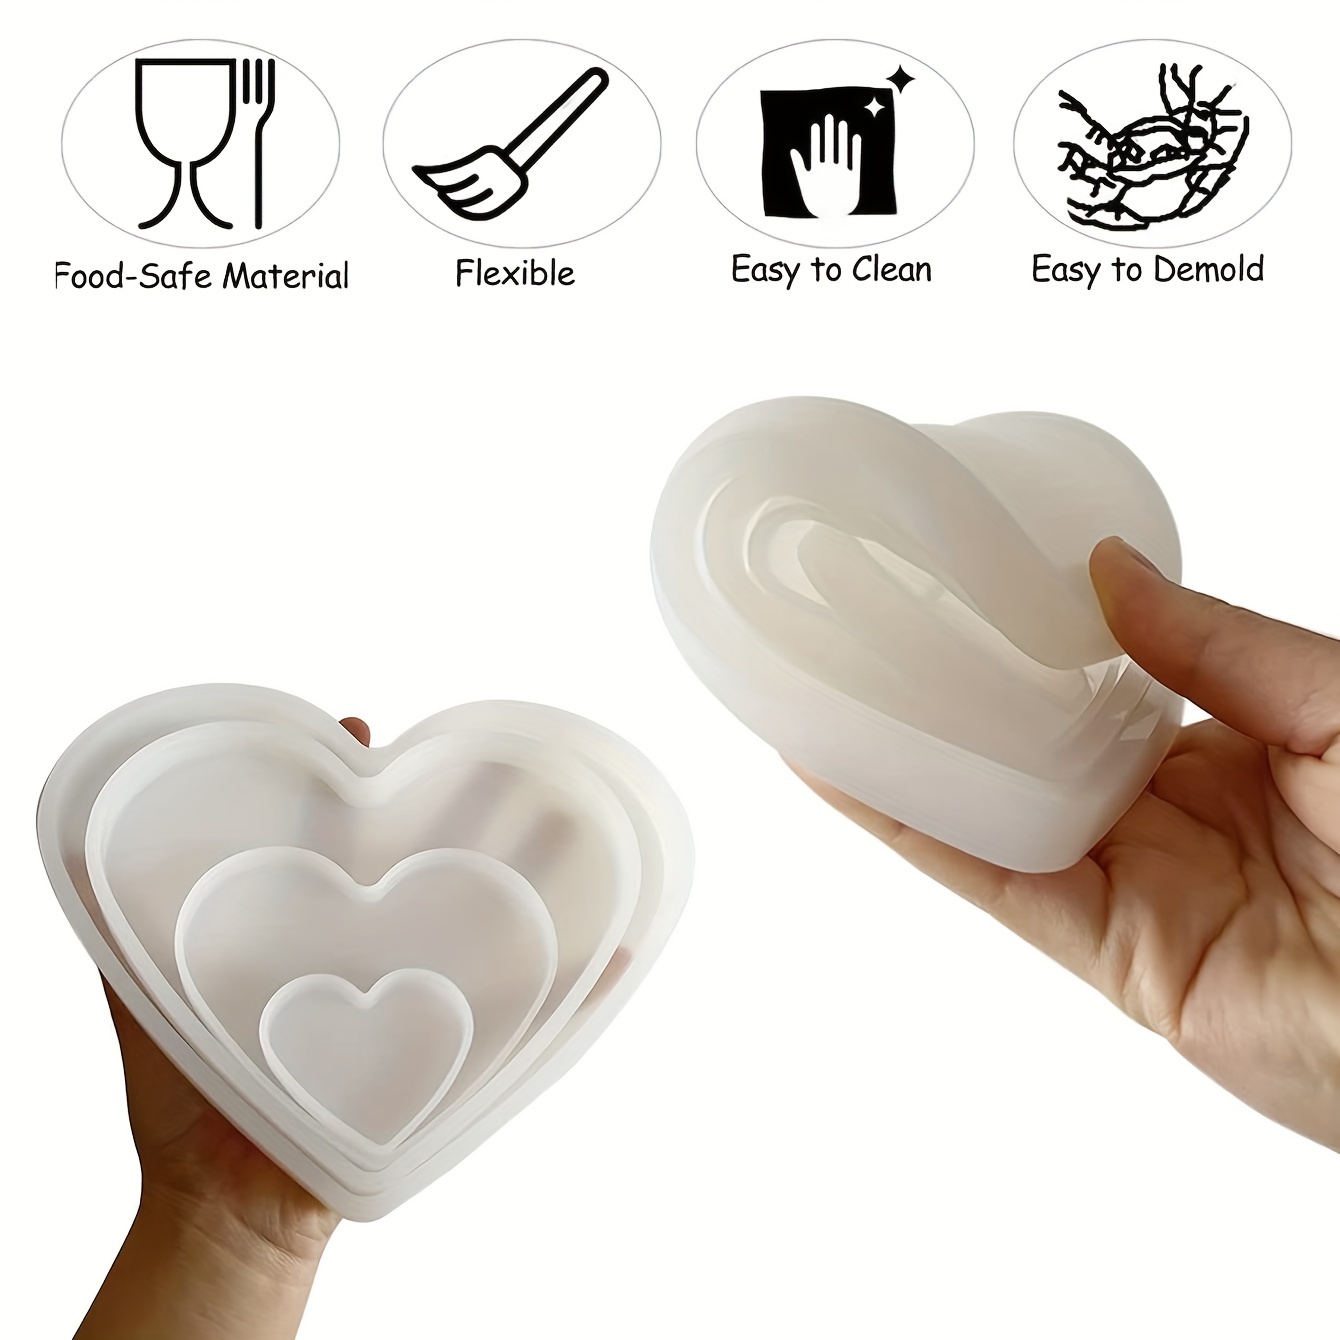 Heart Cake Shaped Silicone Mold Epoxy Resin Mold Crafts Making